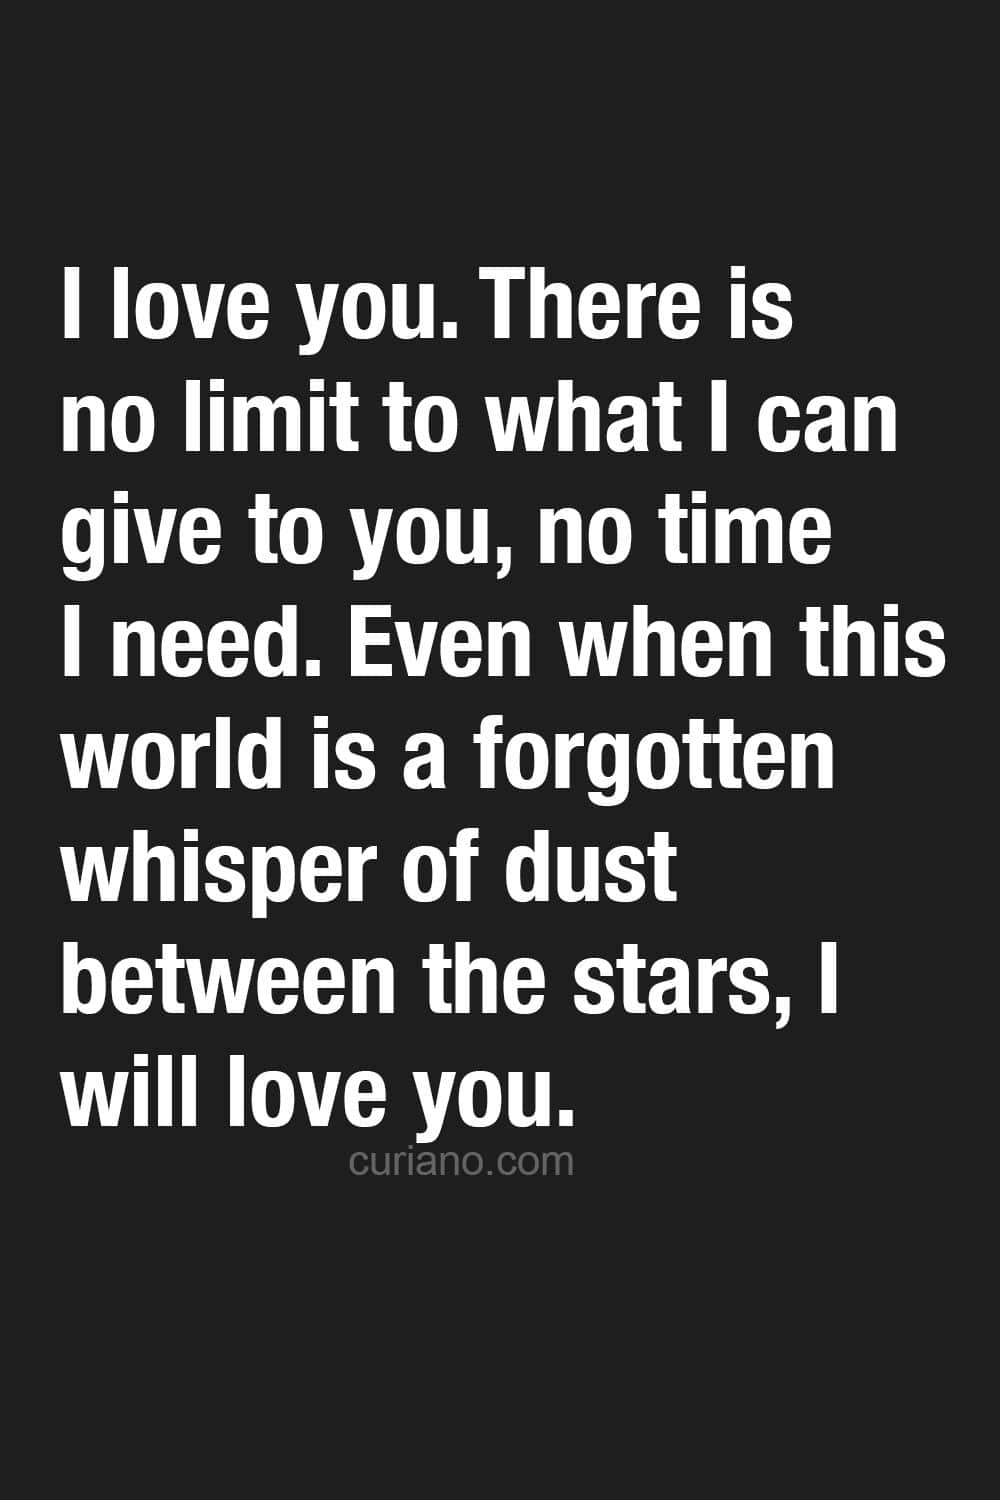 I love you. There is no limit to what I can give to you, no time I need. Even when this world is a forgotten whisper of dust between the stars, I will love you.